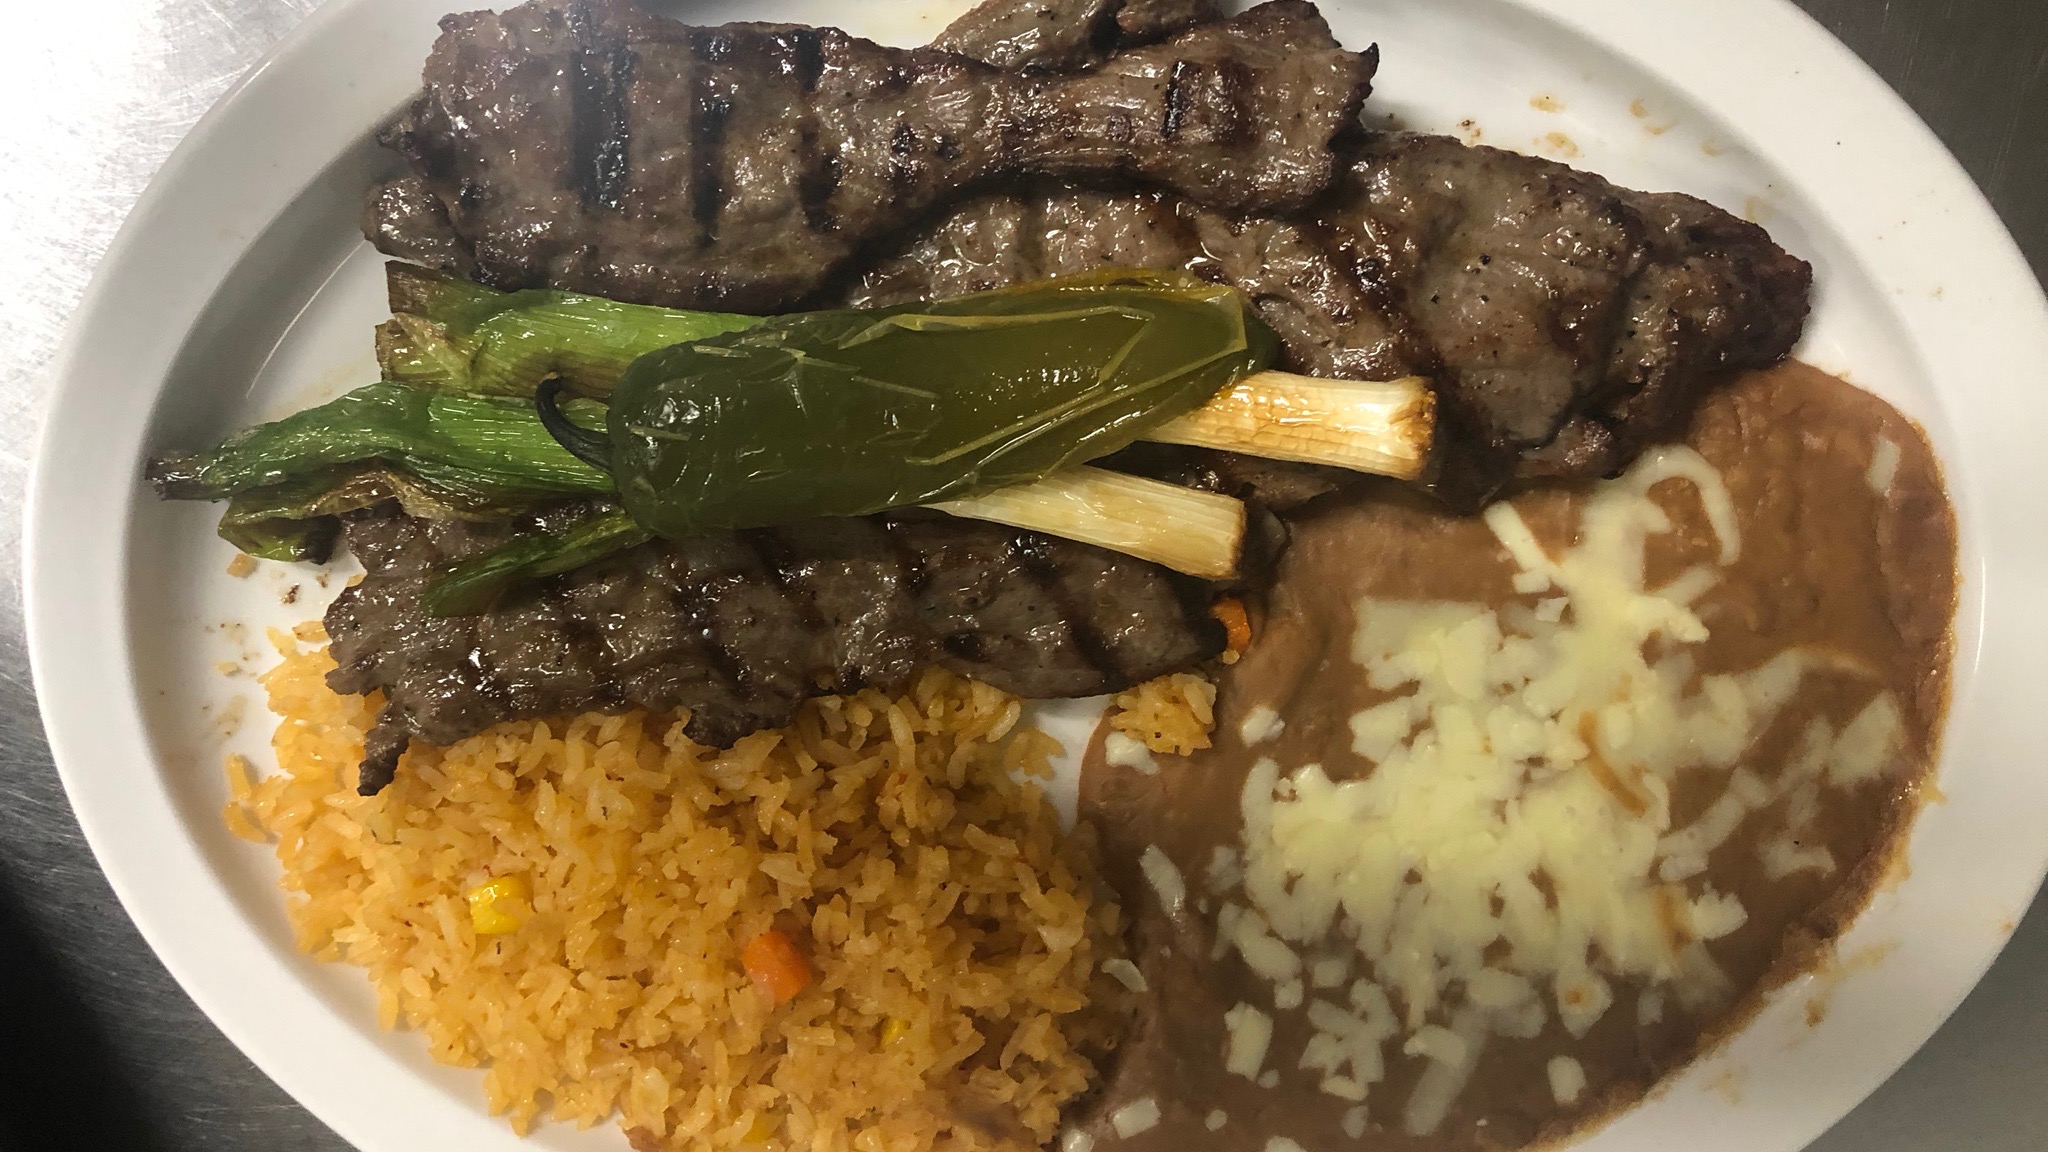 Riviera Maya Restaurant - Some menu items under 10 dollars. Full Beef  Nachos 9.75 Full Chicken Nachos 9.50 Soft/Hard Regular Tacos 9.75 Special  Burritos (2) 9.99 Taco Salad 9.75 Traditional Quesadilla 9.99 Prices are  for dine-in only.